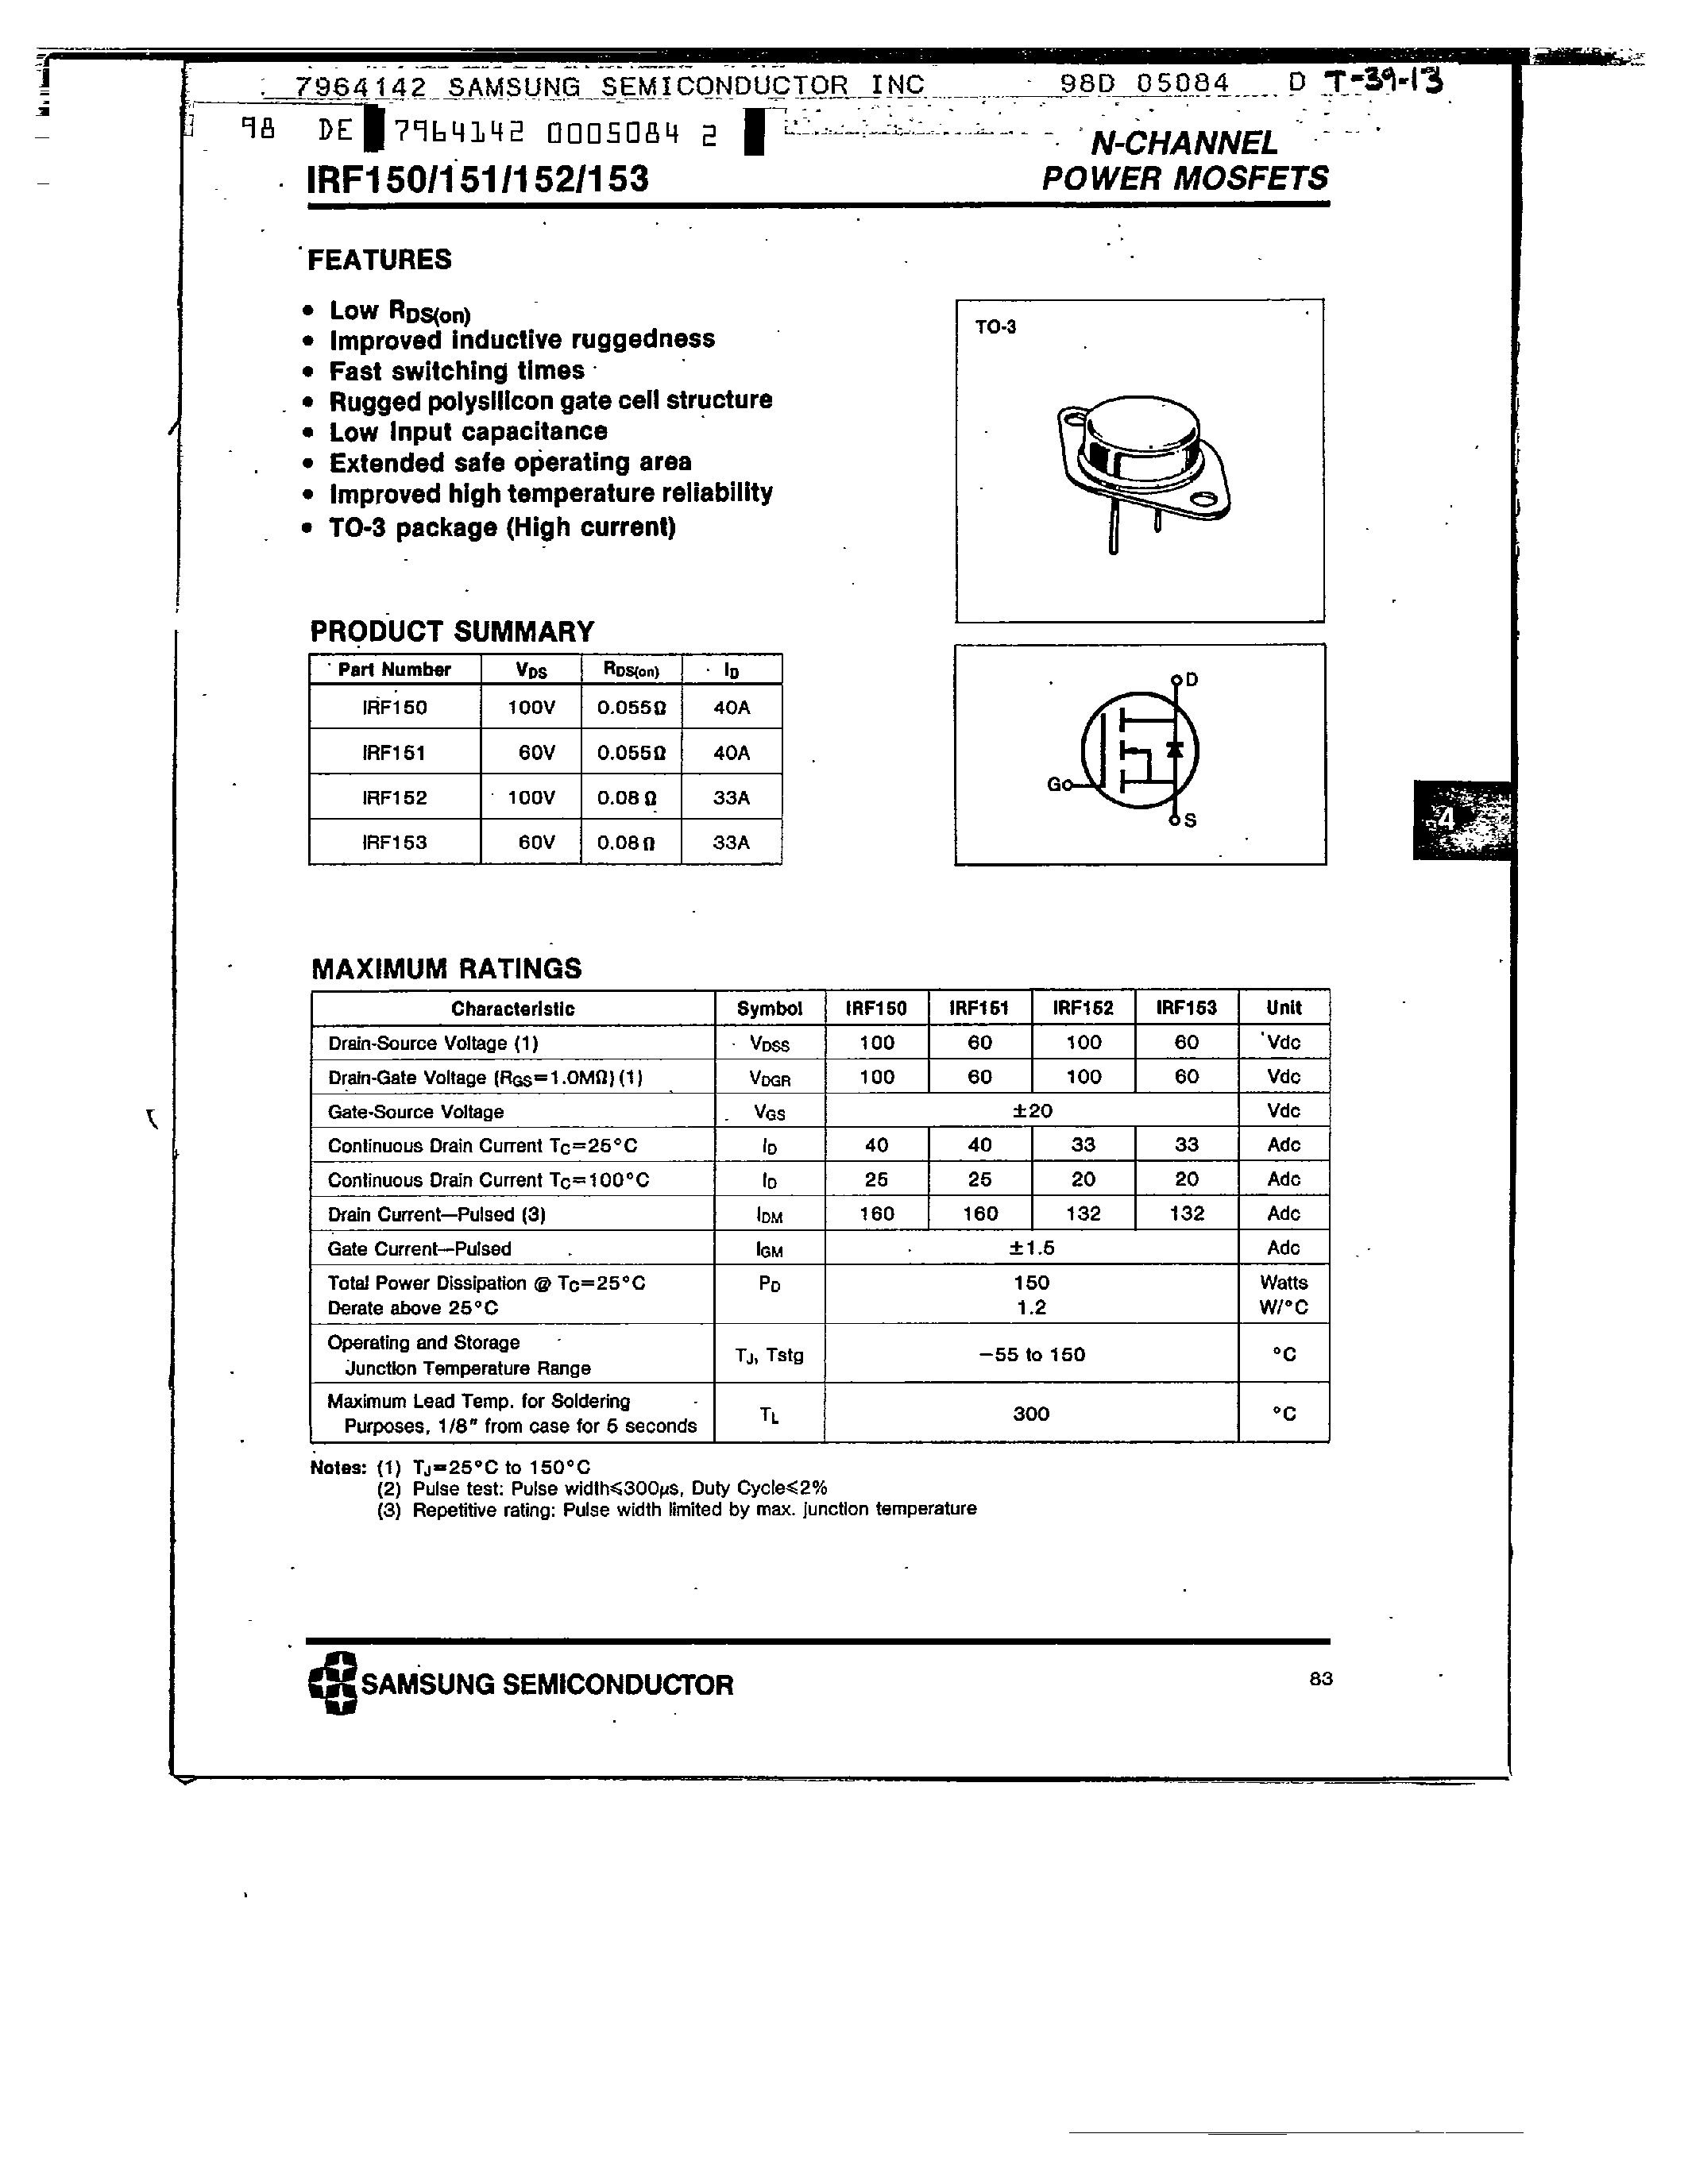 Datasheet IRF151 - N-CHANNEL POWER MOSFETS page 1